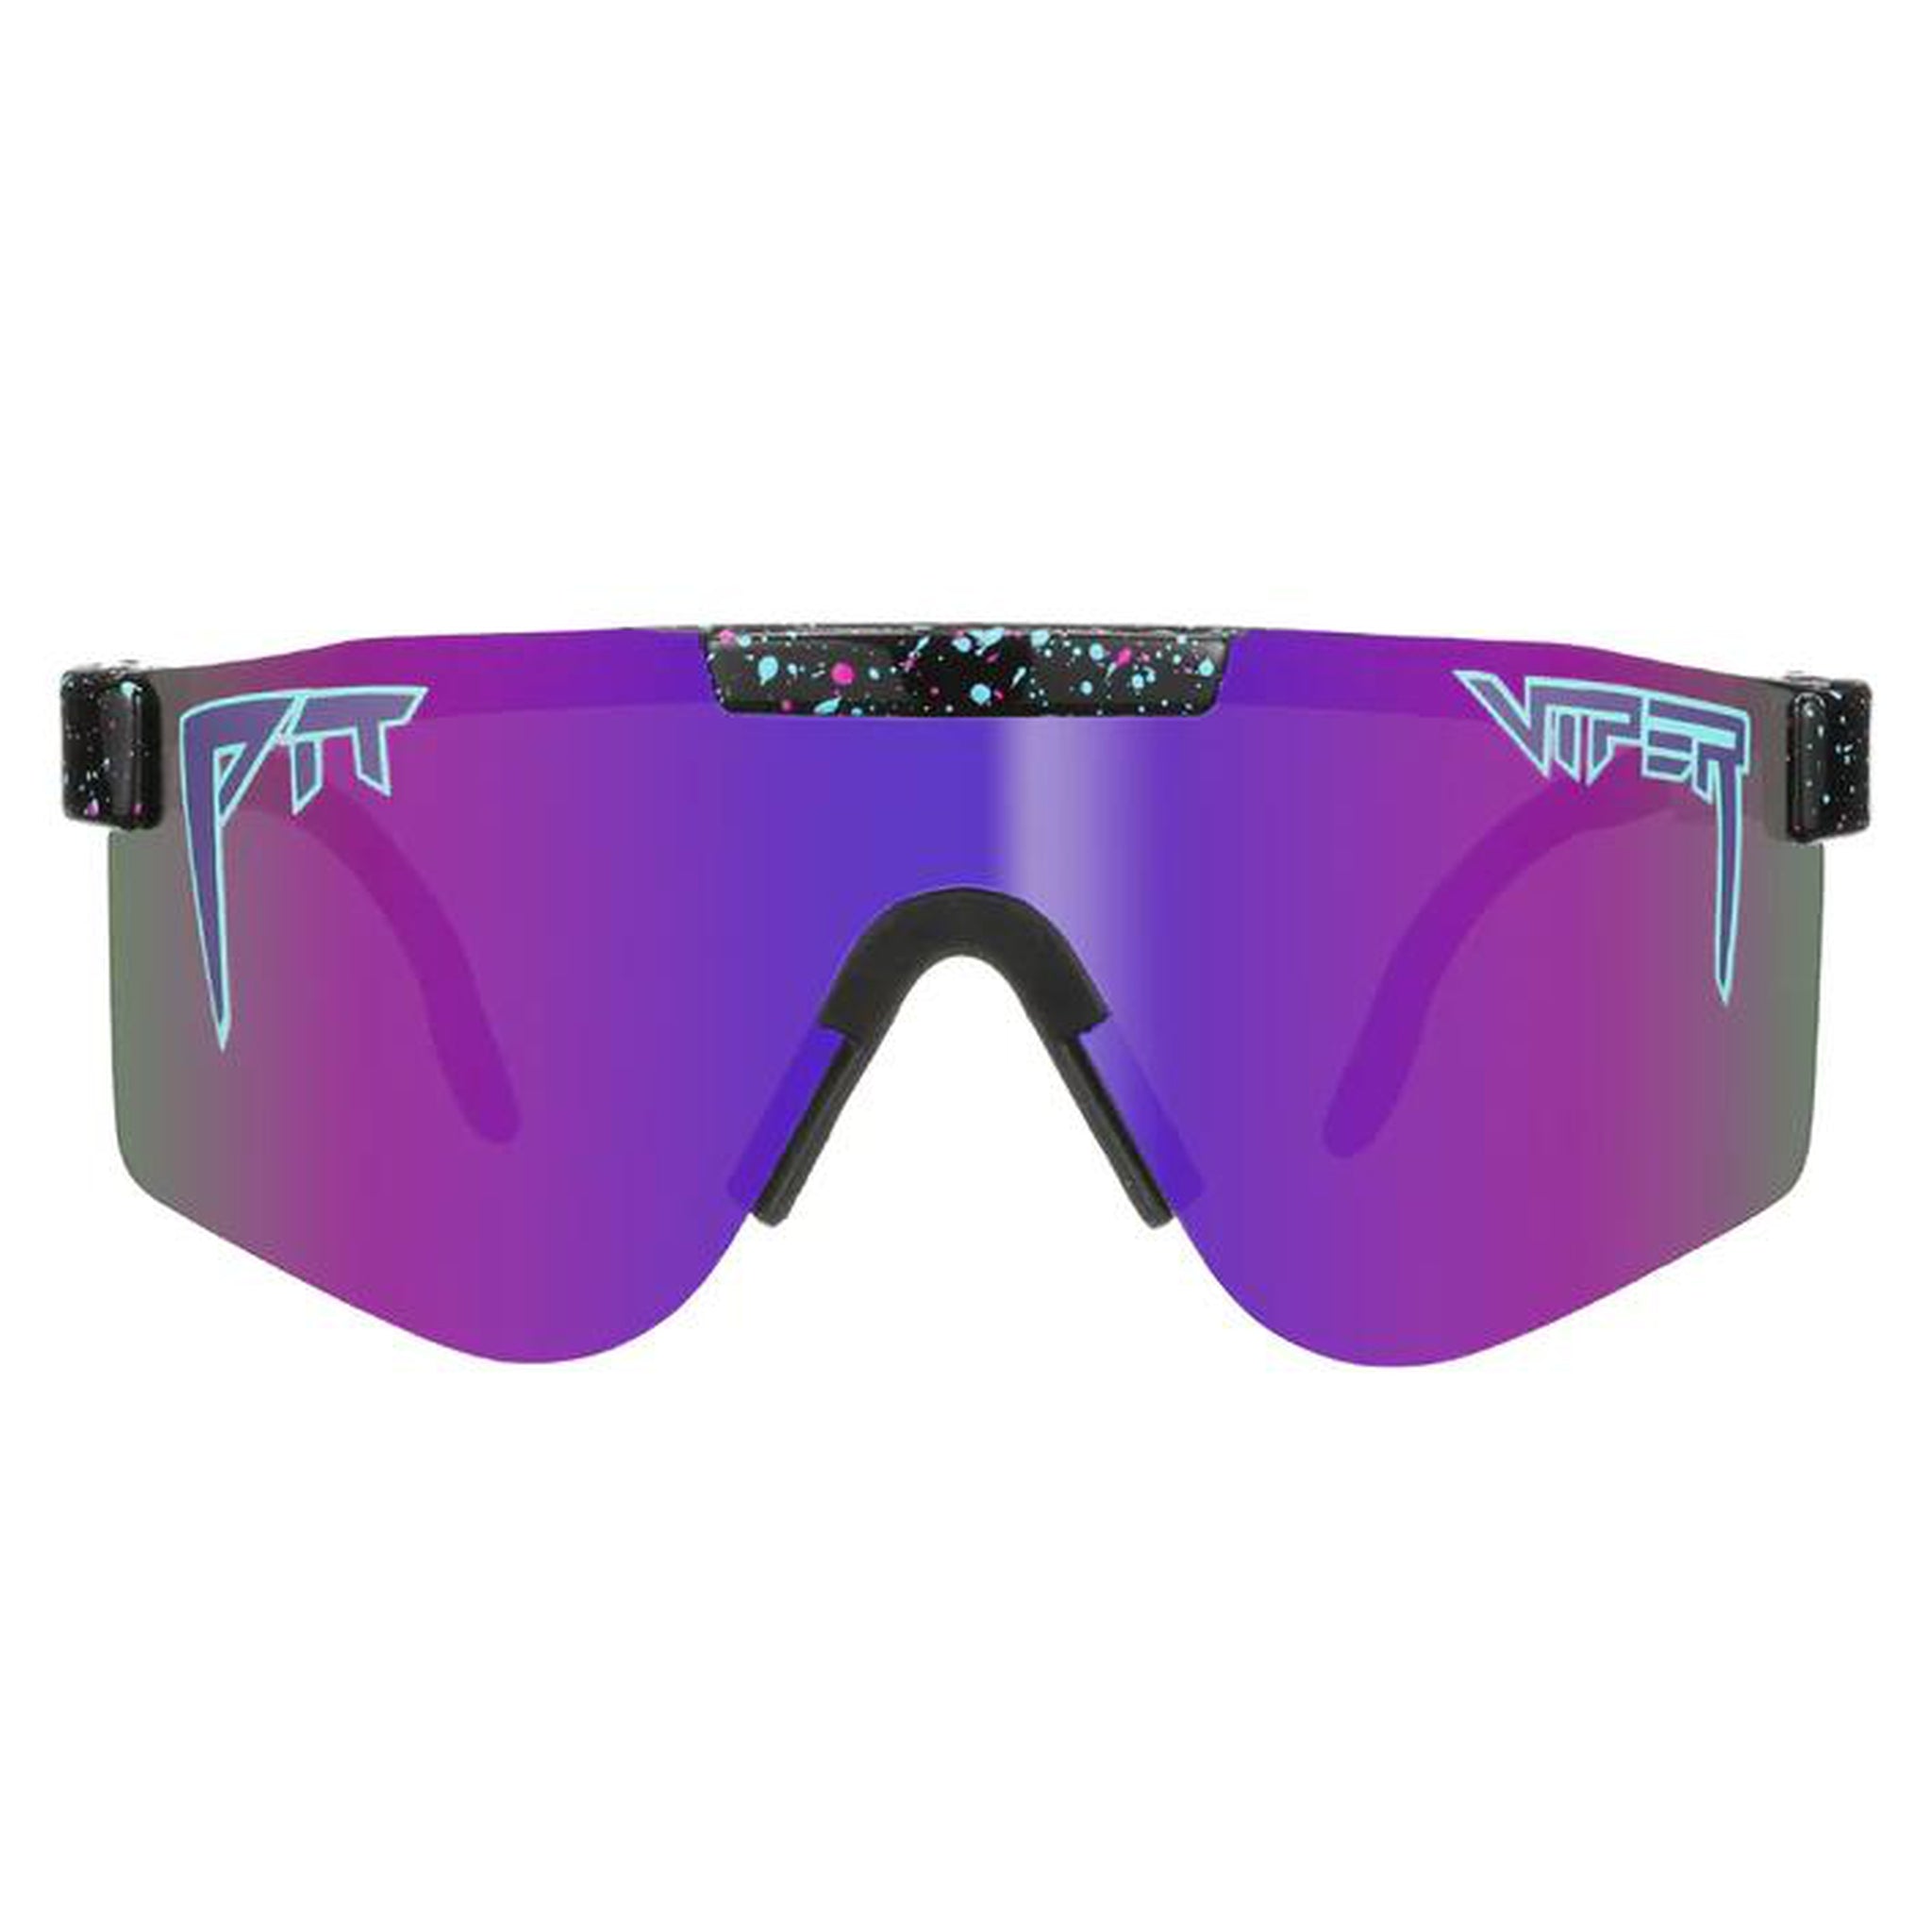 Shop All - Pit Vipers